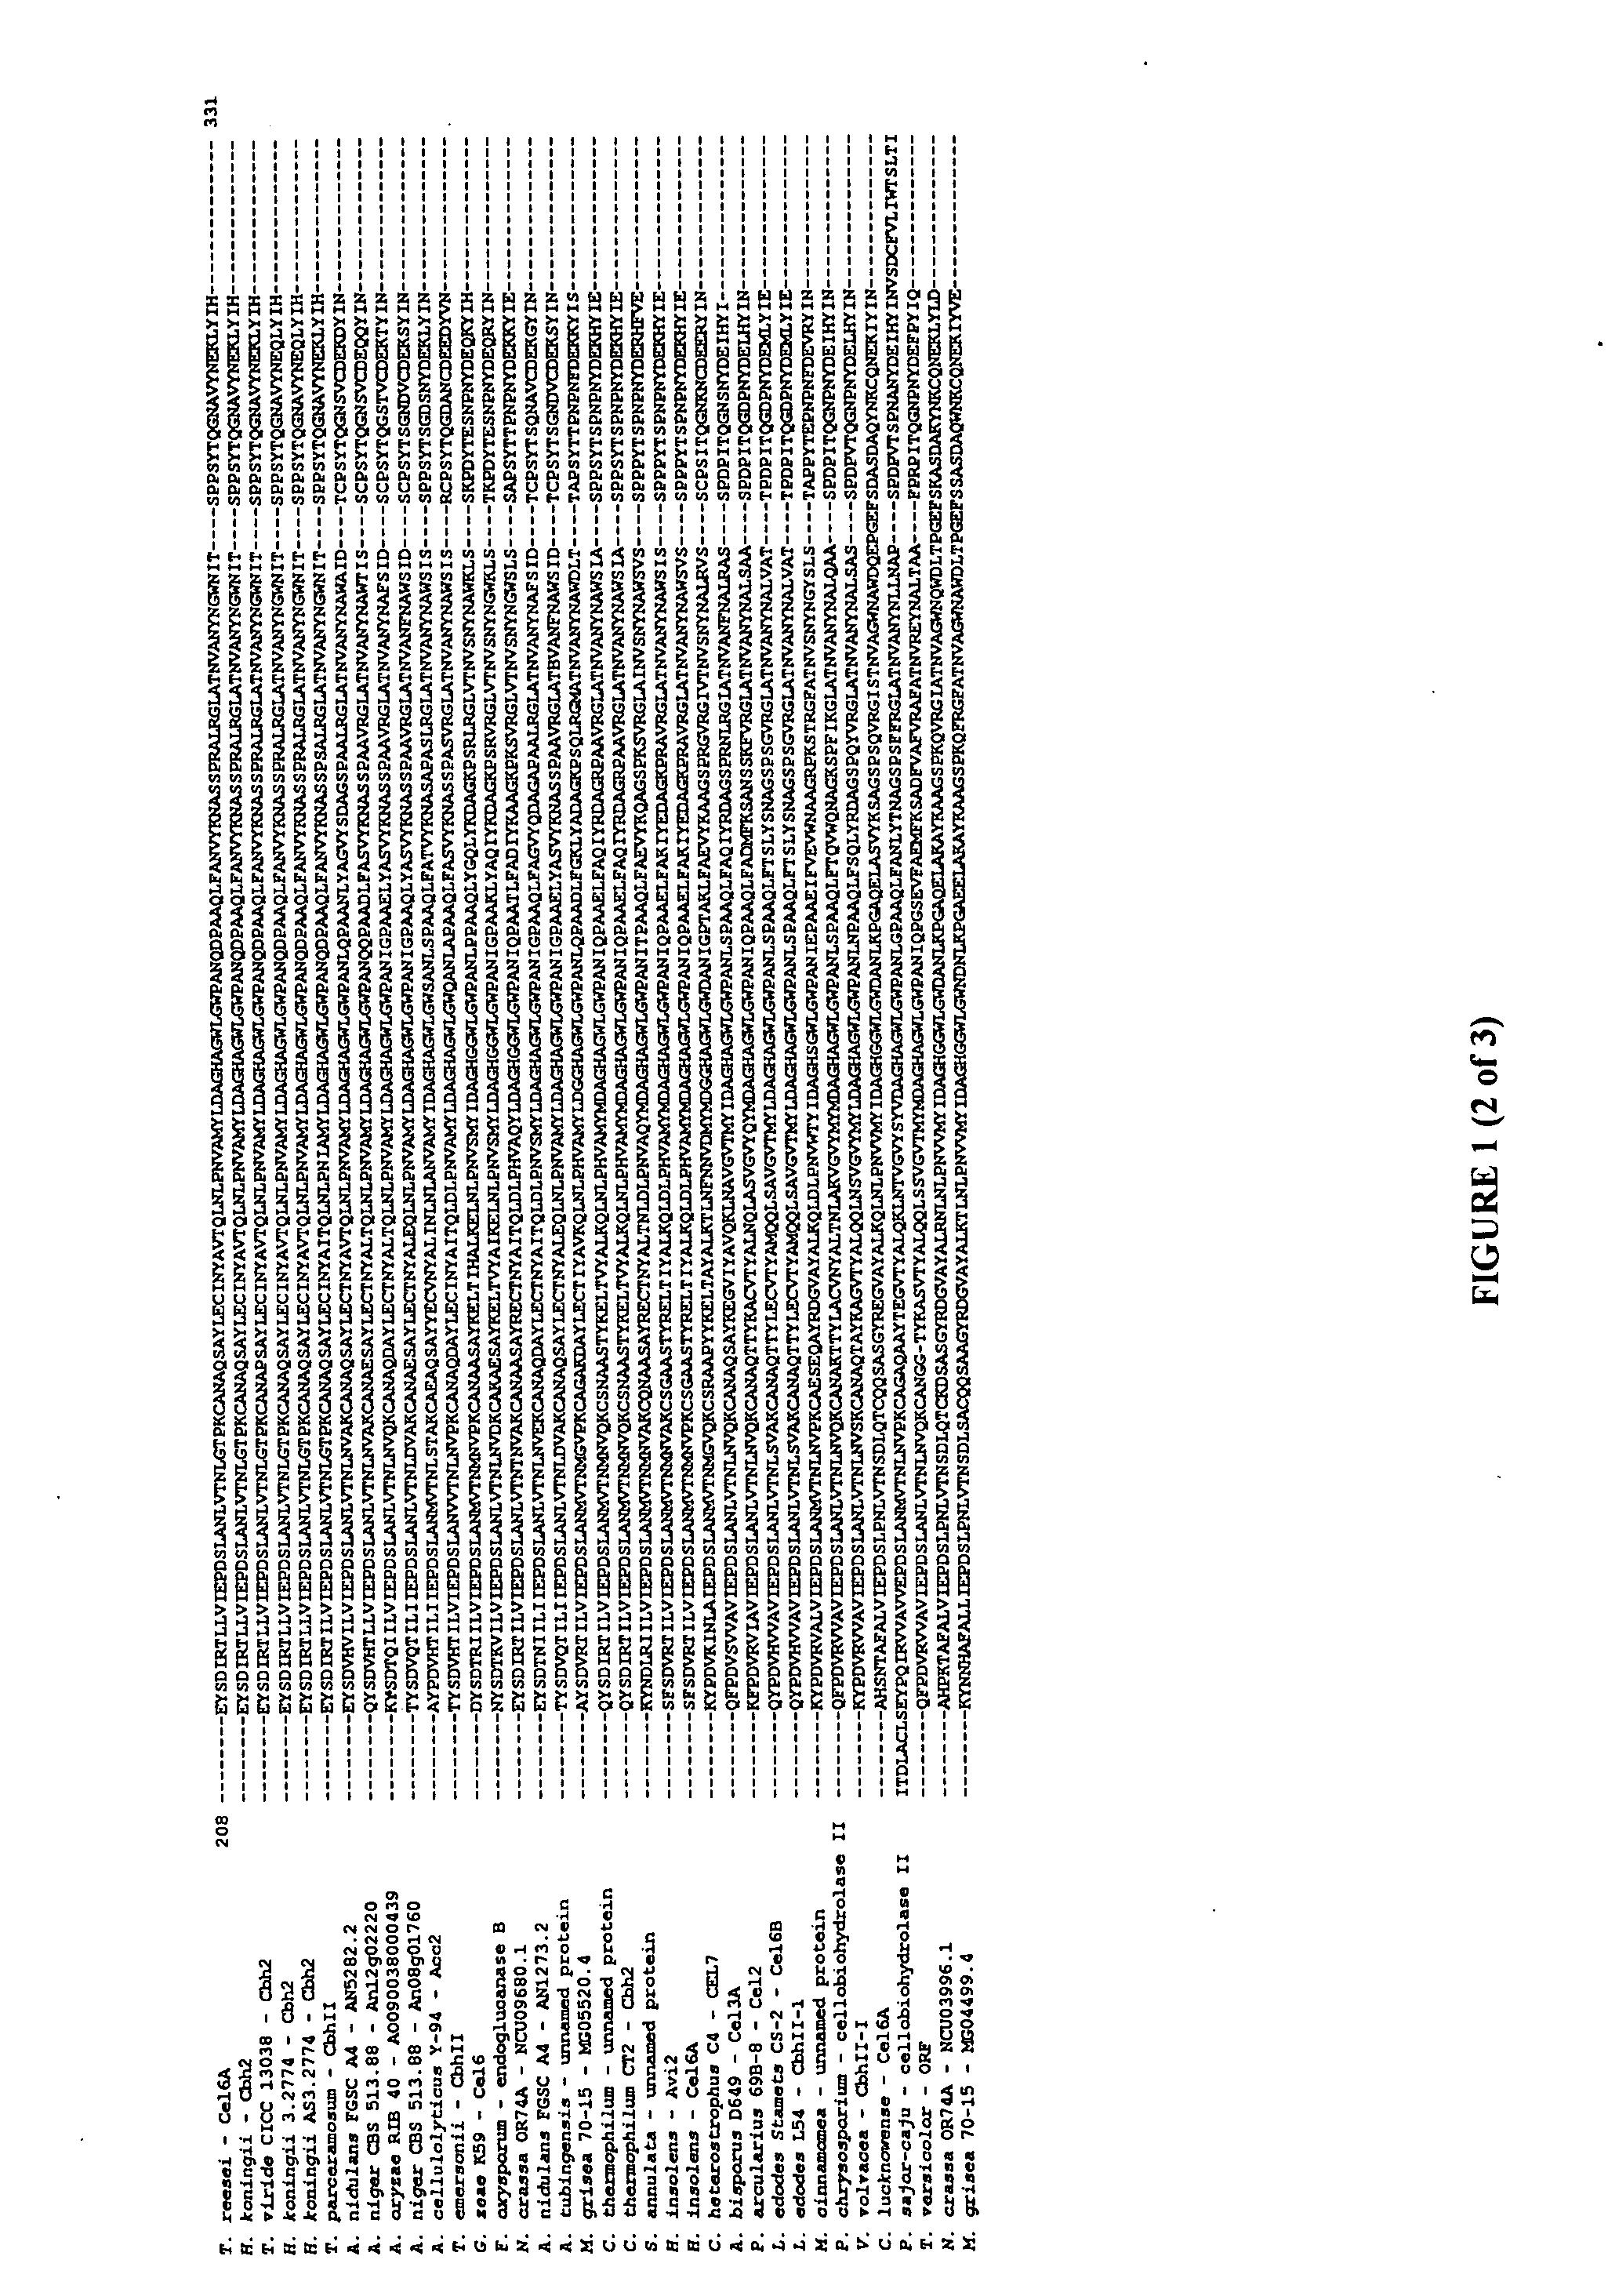 Cellulase variants with reduced inhibition by glucose